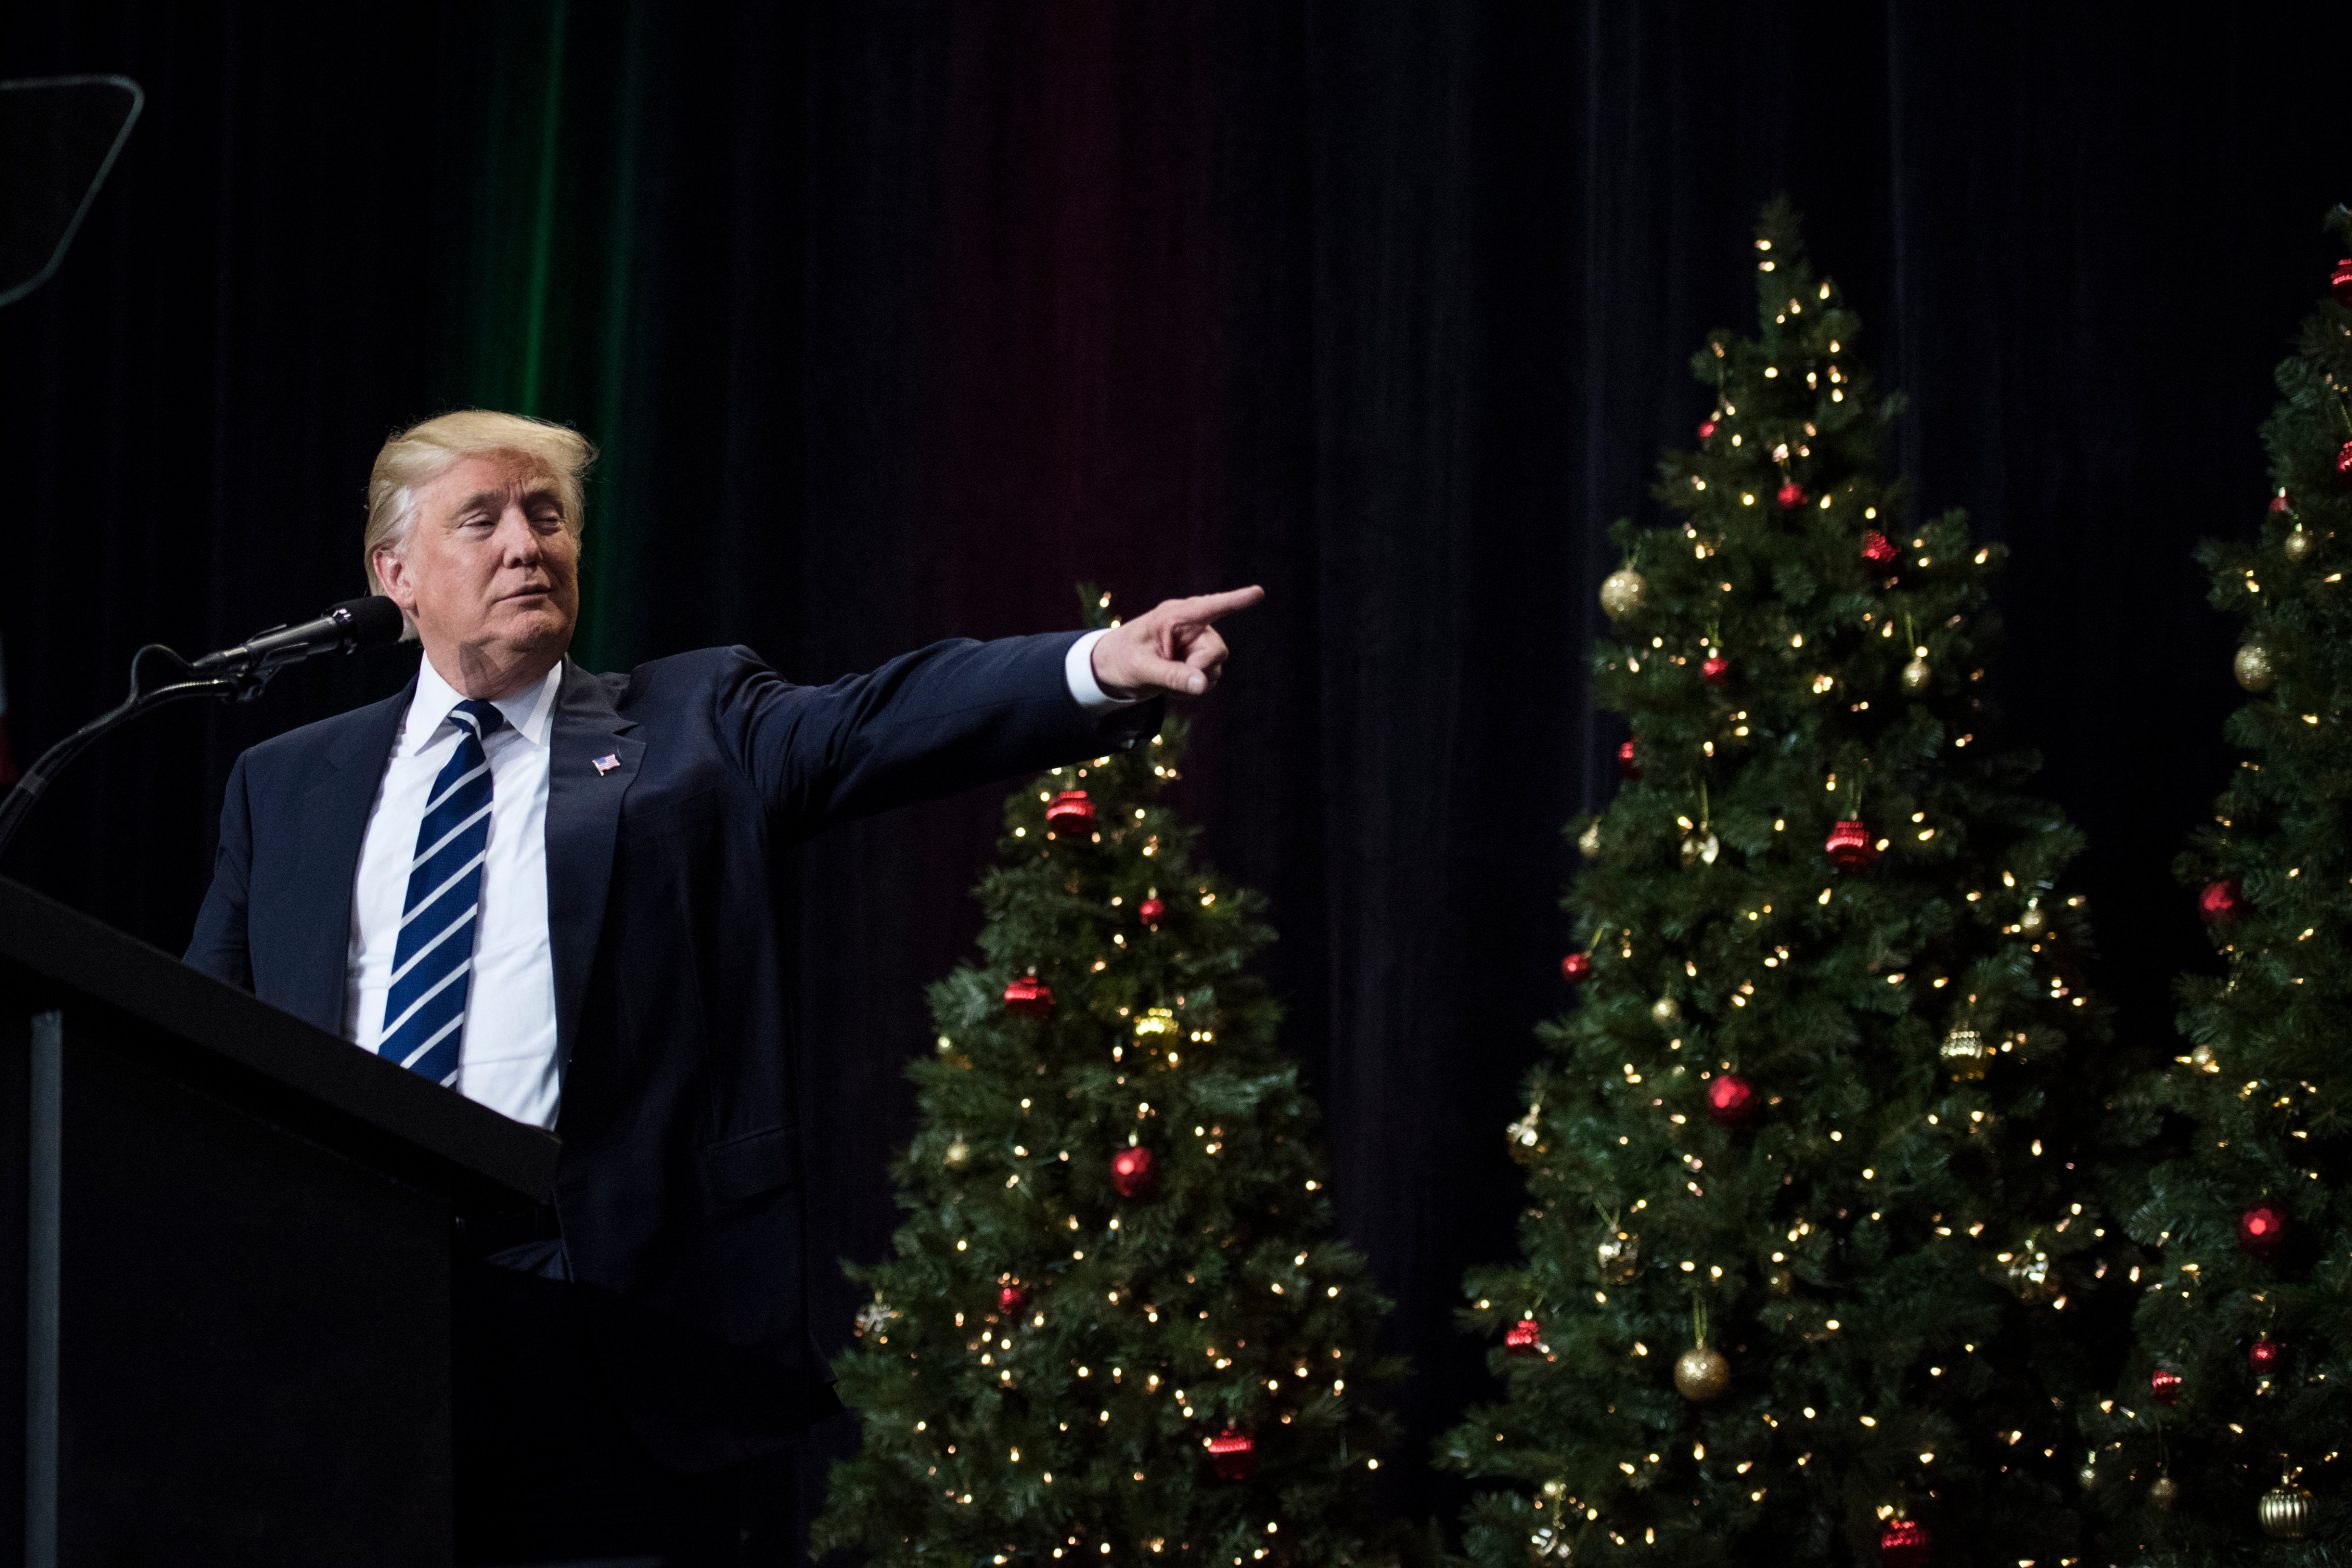 President-elect Donald Trump surrounded by Christmas trees speaks during an event in West Allis, WI on Tuesday, Dec. 13, 2016. (The Washington Post—The Washington Post/Getty Images)